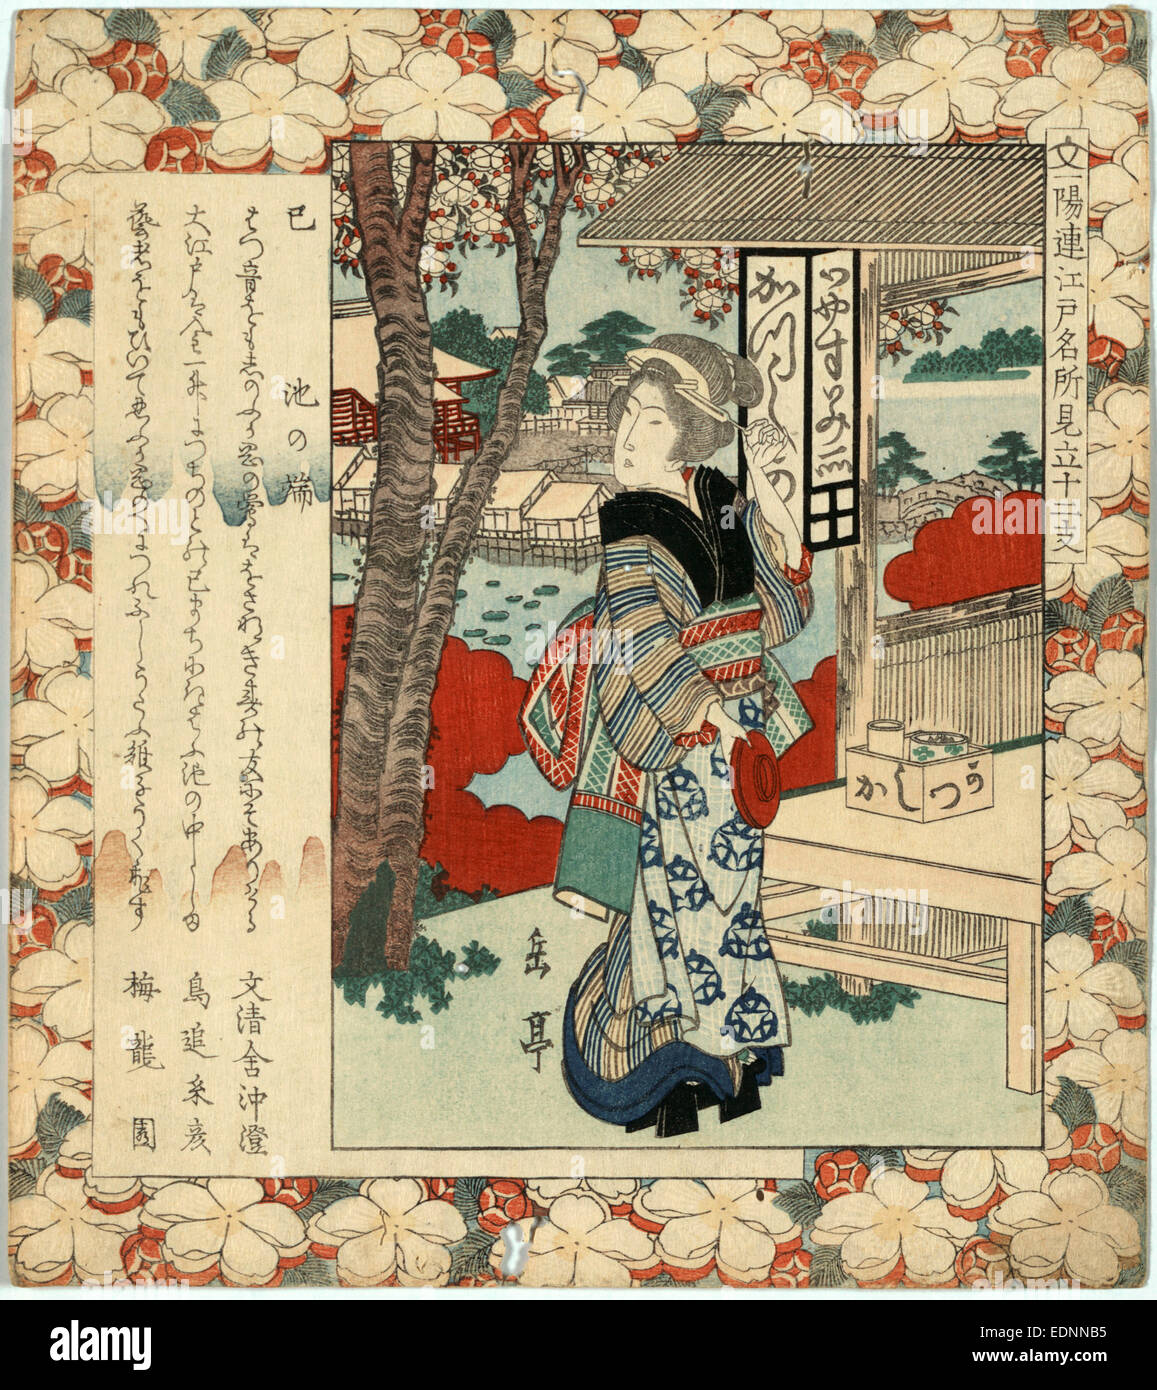 Mi ikenohata, Year of the snake: Ikenohada., Yajima, Gogaku, active 19th century, artist, [between 1818 and 1830], 1 print : woodcut, color ; 21.3 x 19 cm., Print shows a woman, full-length portrait, standing outside a building, wearing kimono and geta, with view of village connected by a bridge in the background; page patterned with blossoms. Stock Photo